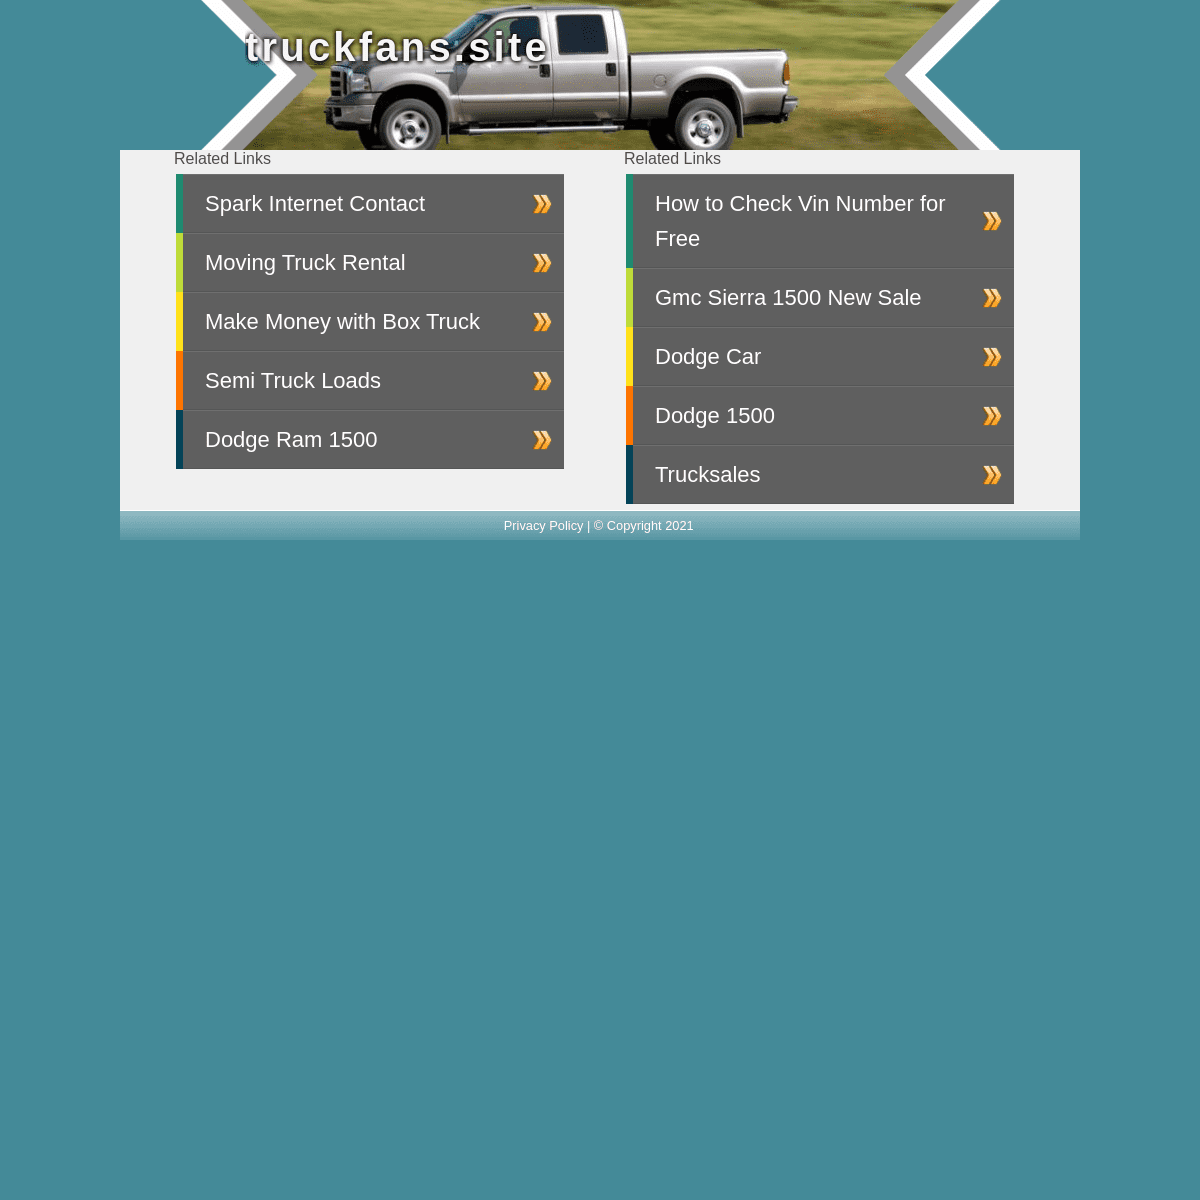 A complete backup of https://truckfans.site